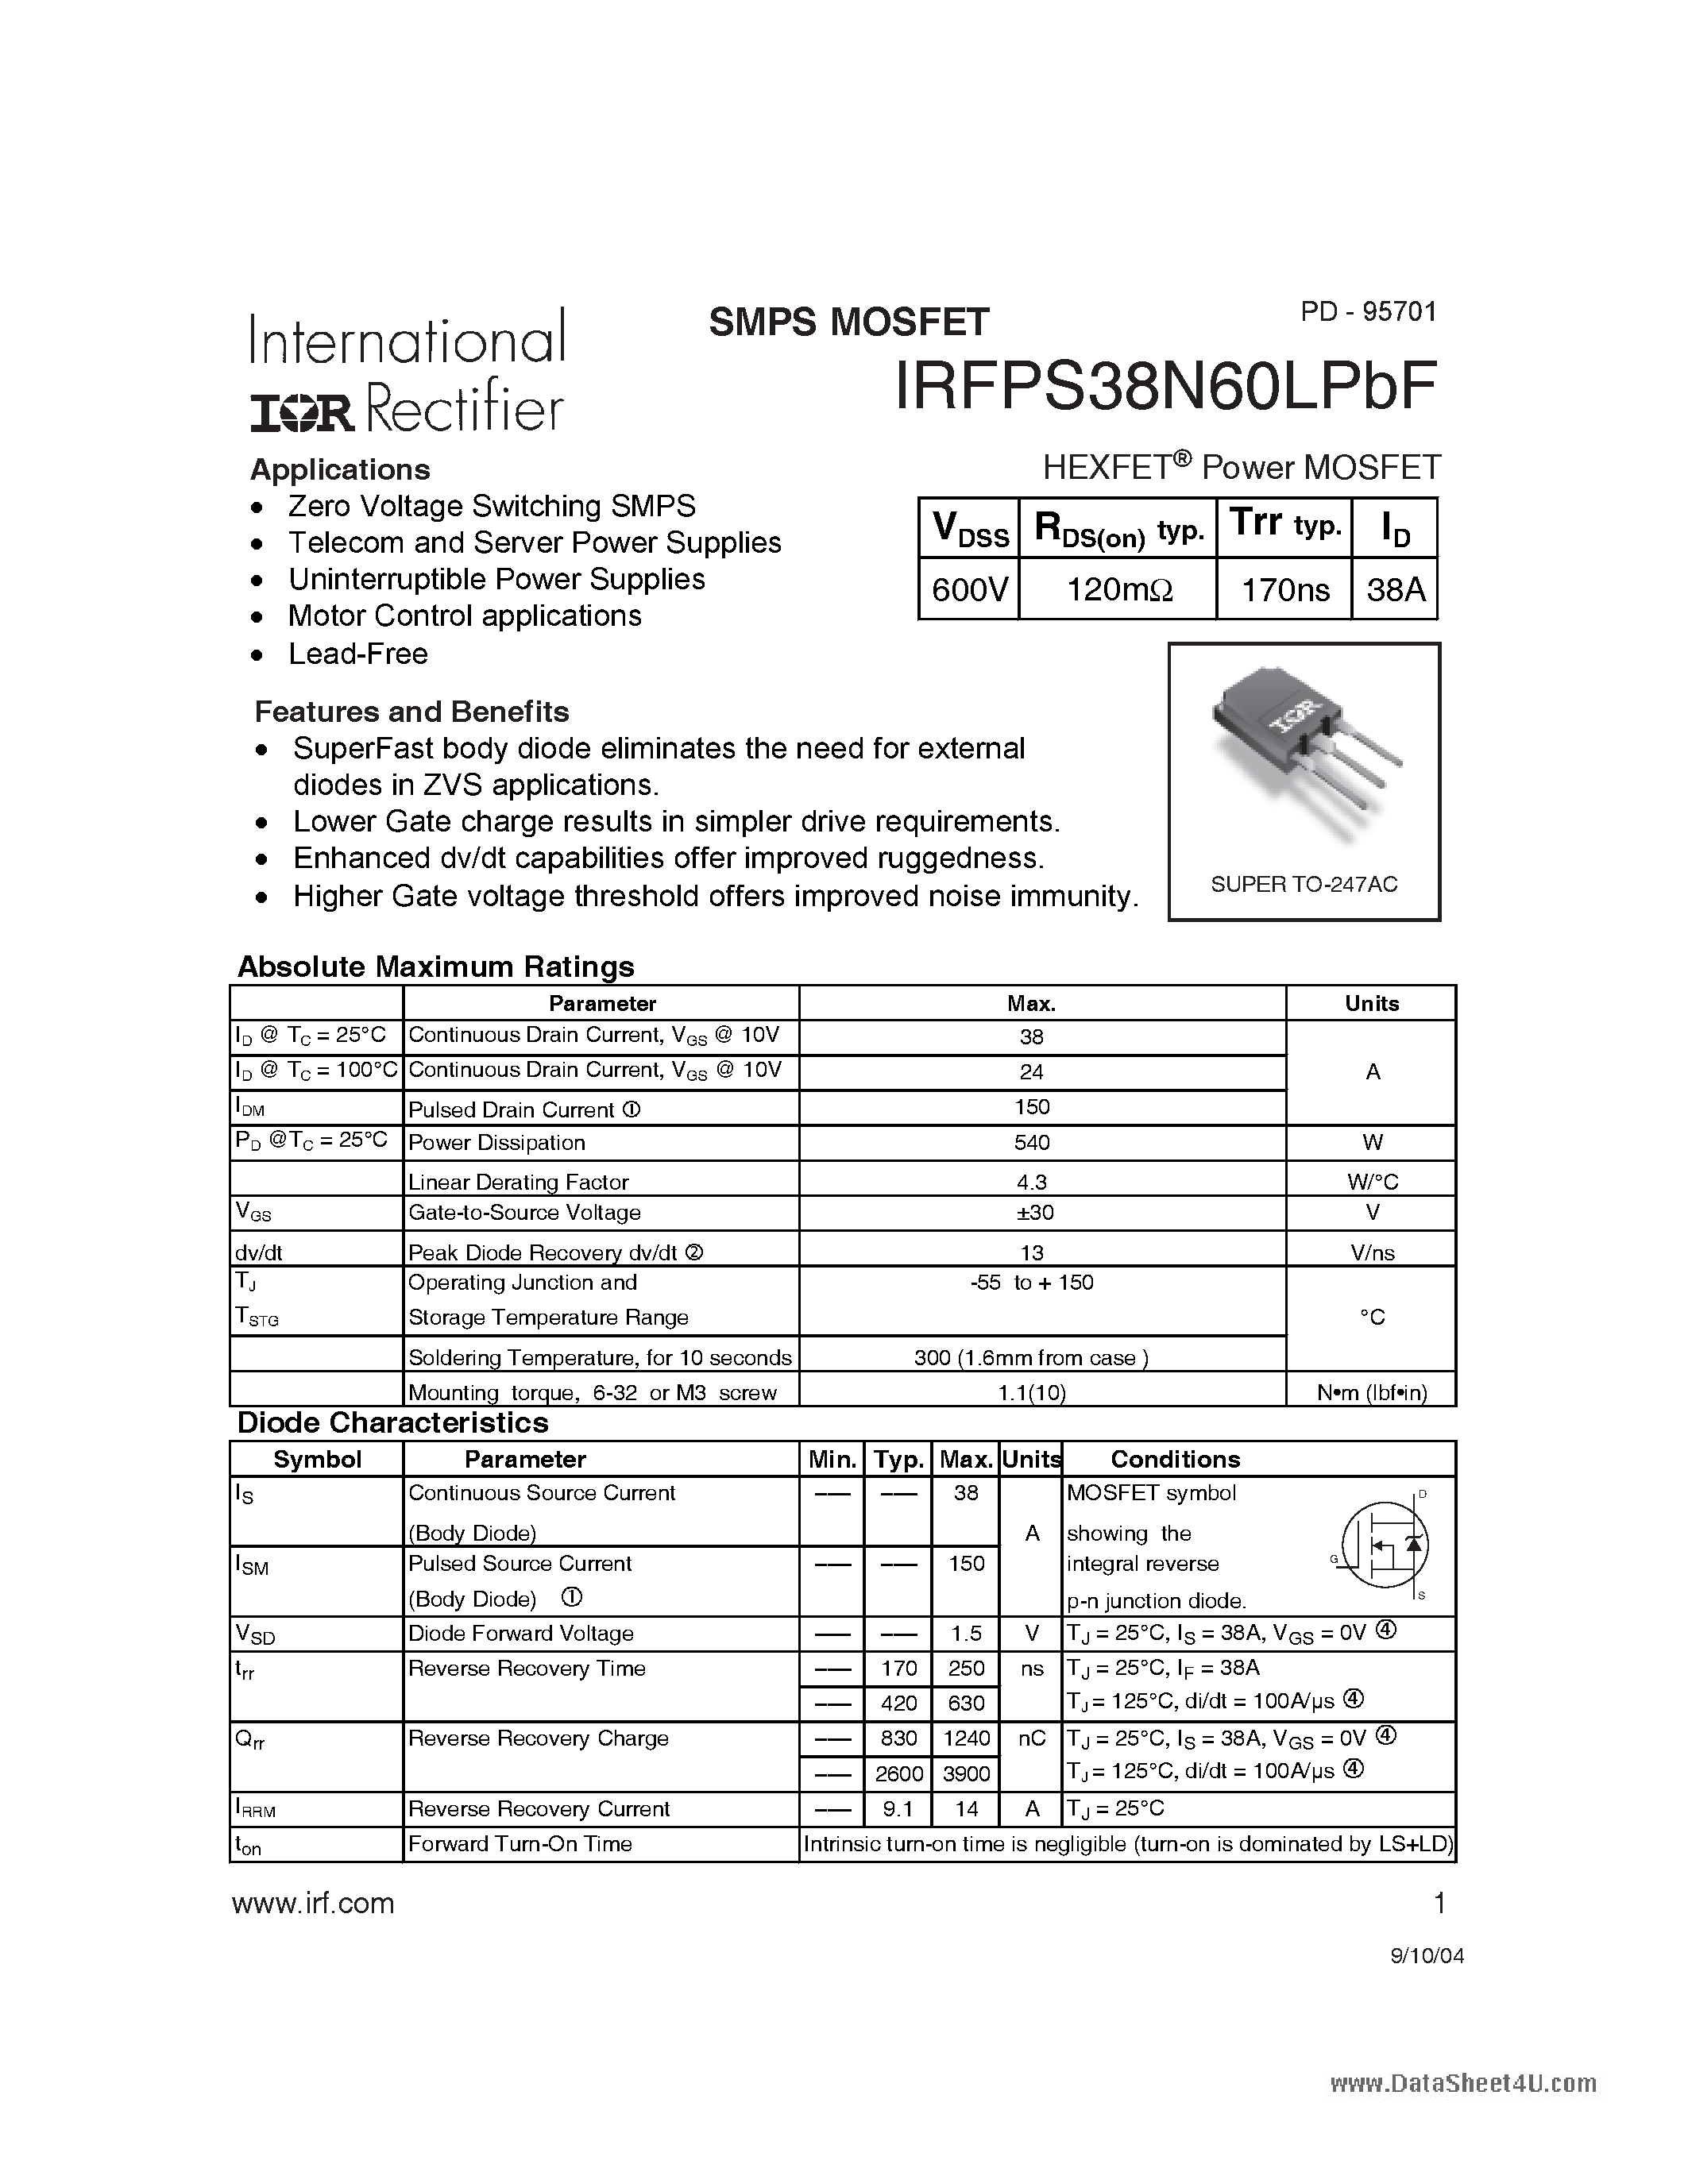 Datasheet IRFPS38N60LPBF - HEXFET Power MOSFET page 1